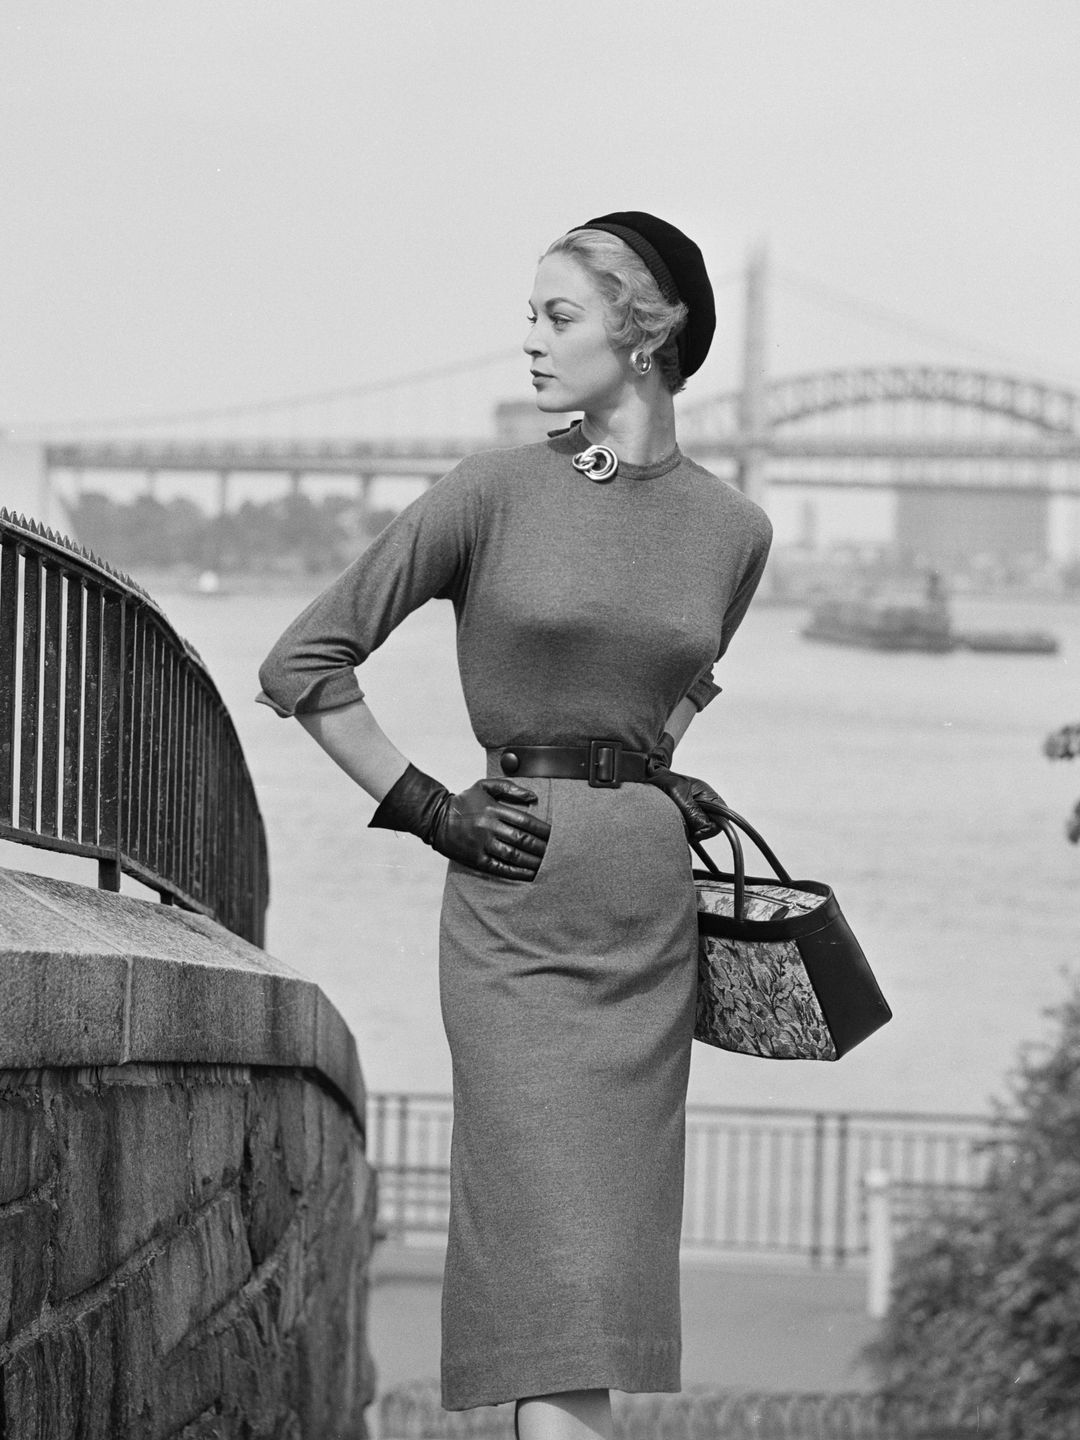 Pencil skirts emphasised the hugely popular hourglass silhouette 